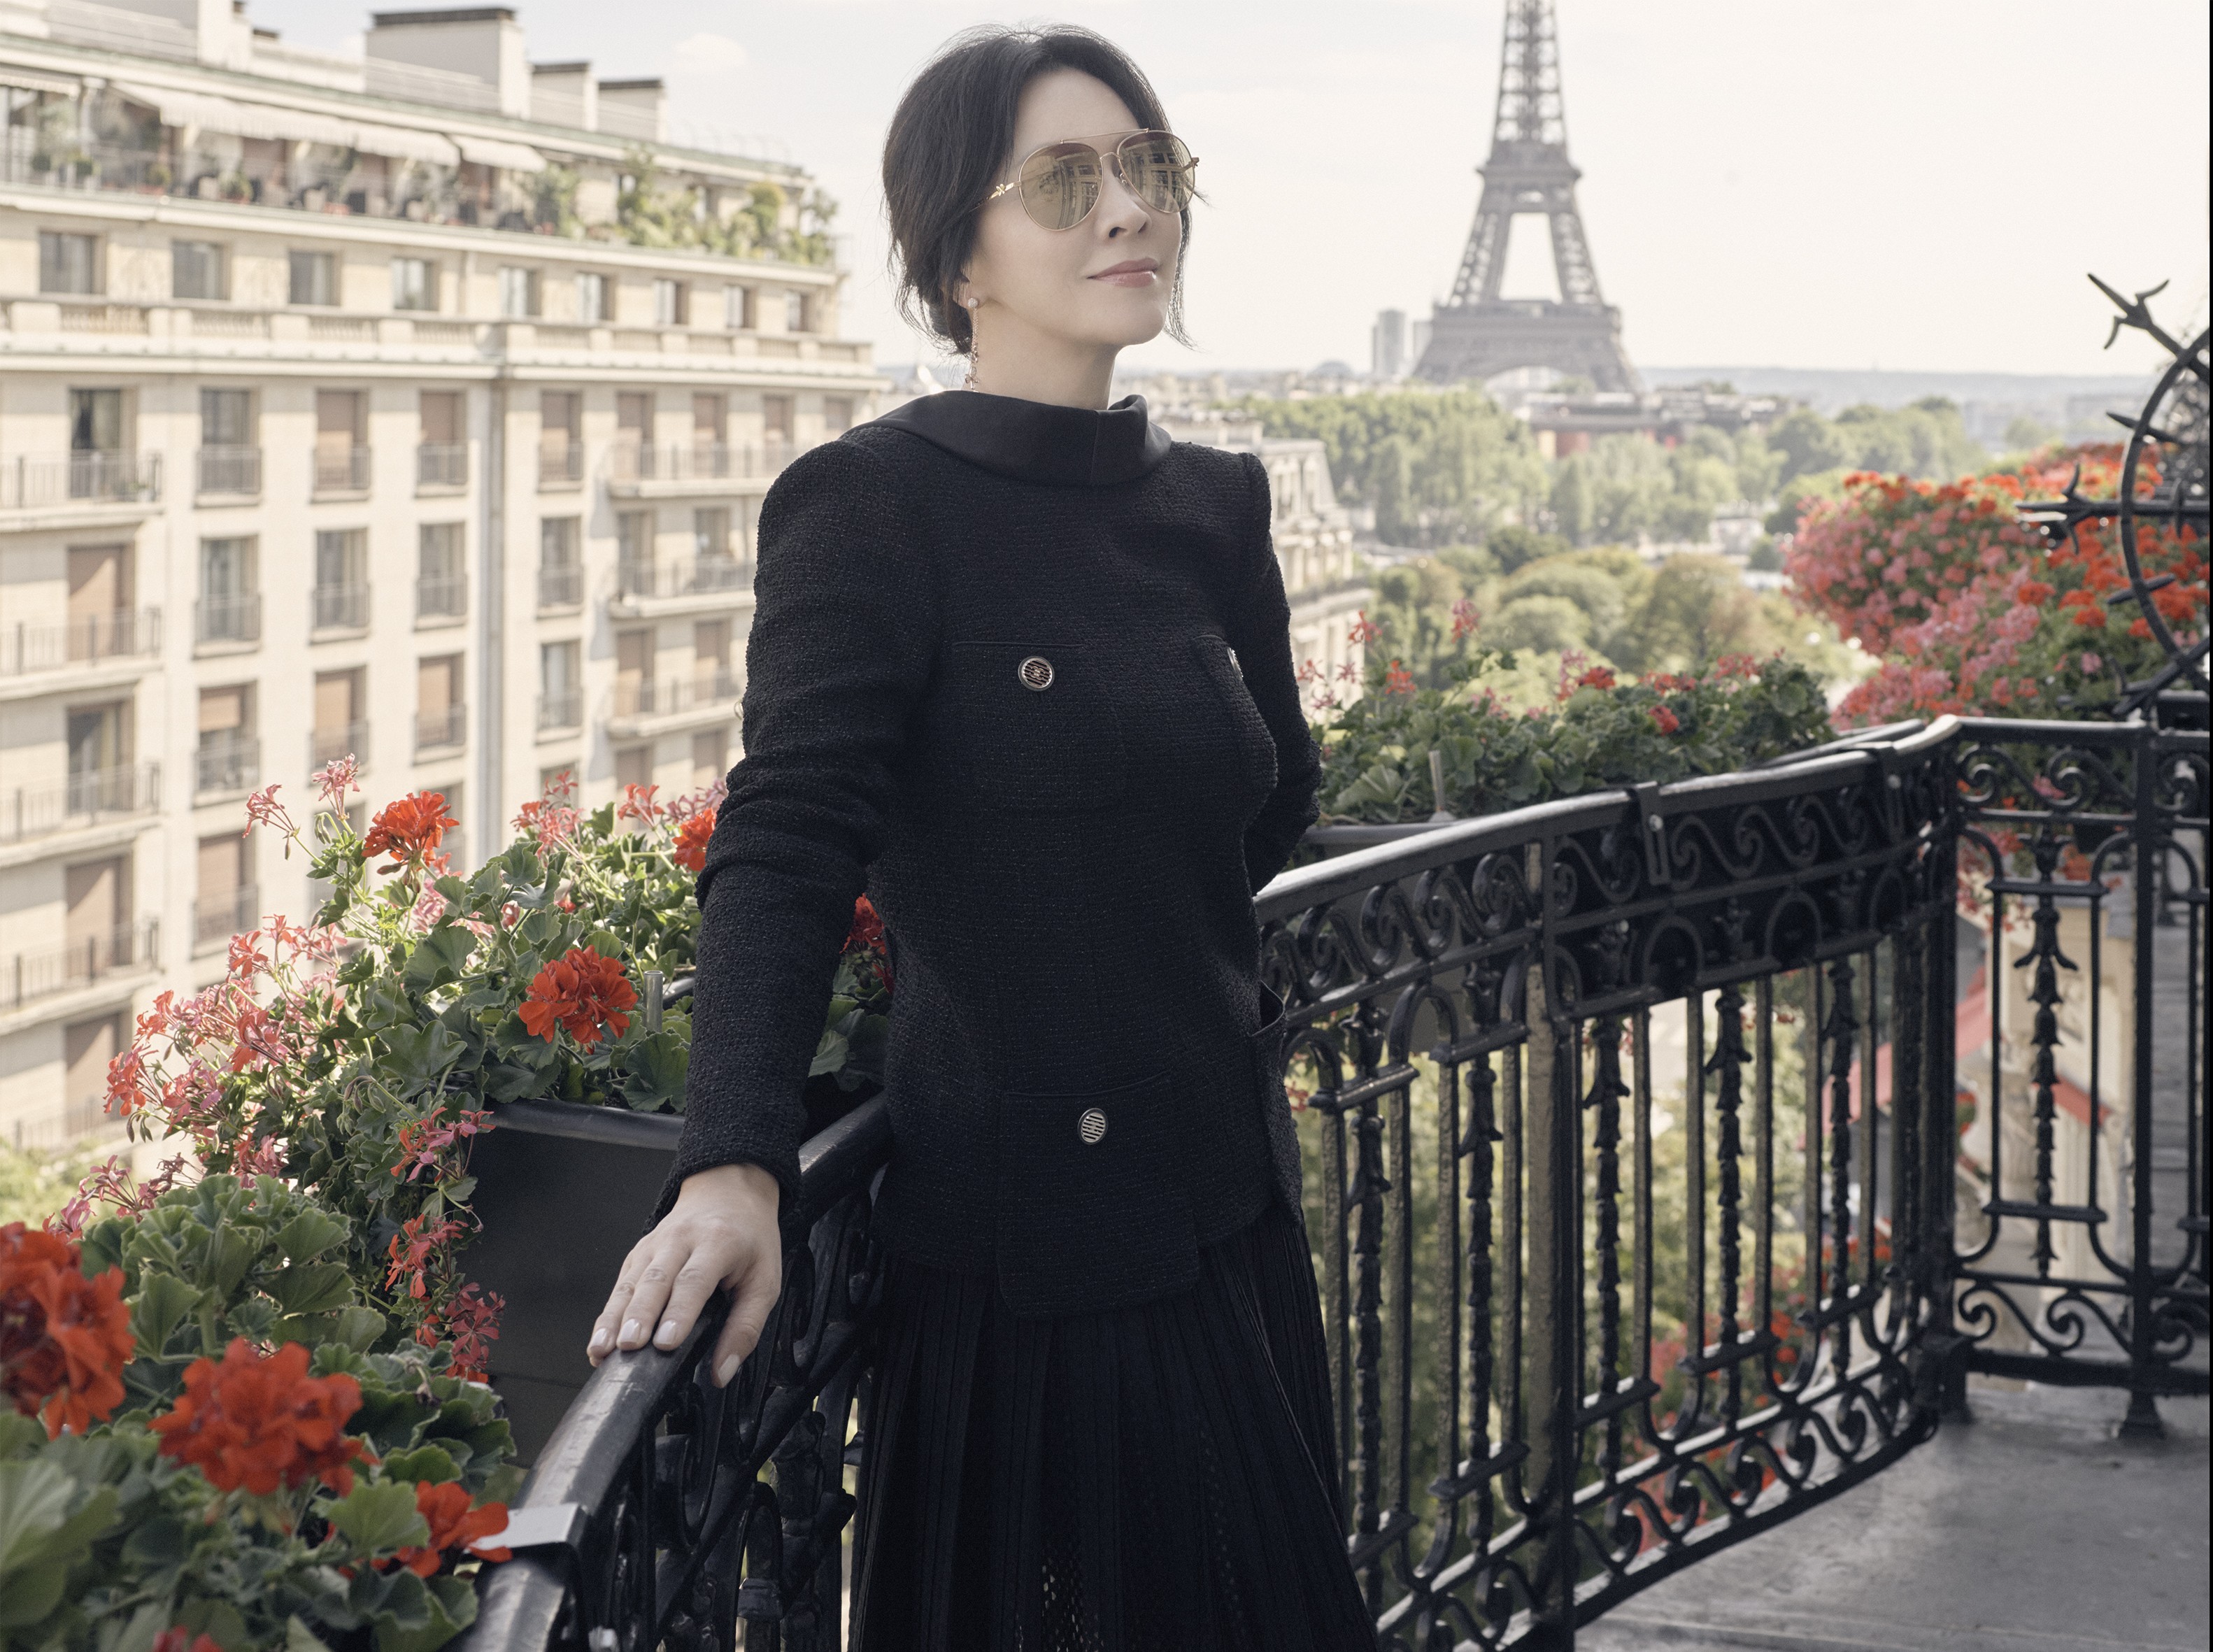 Actress Carina Lau has launched her lifestyle brand +01.